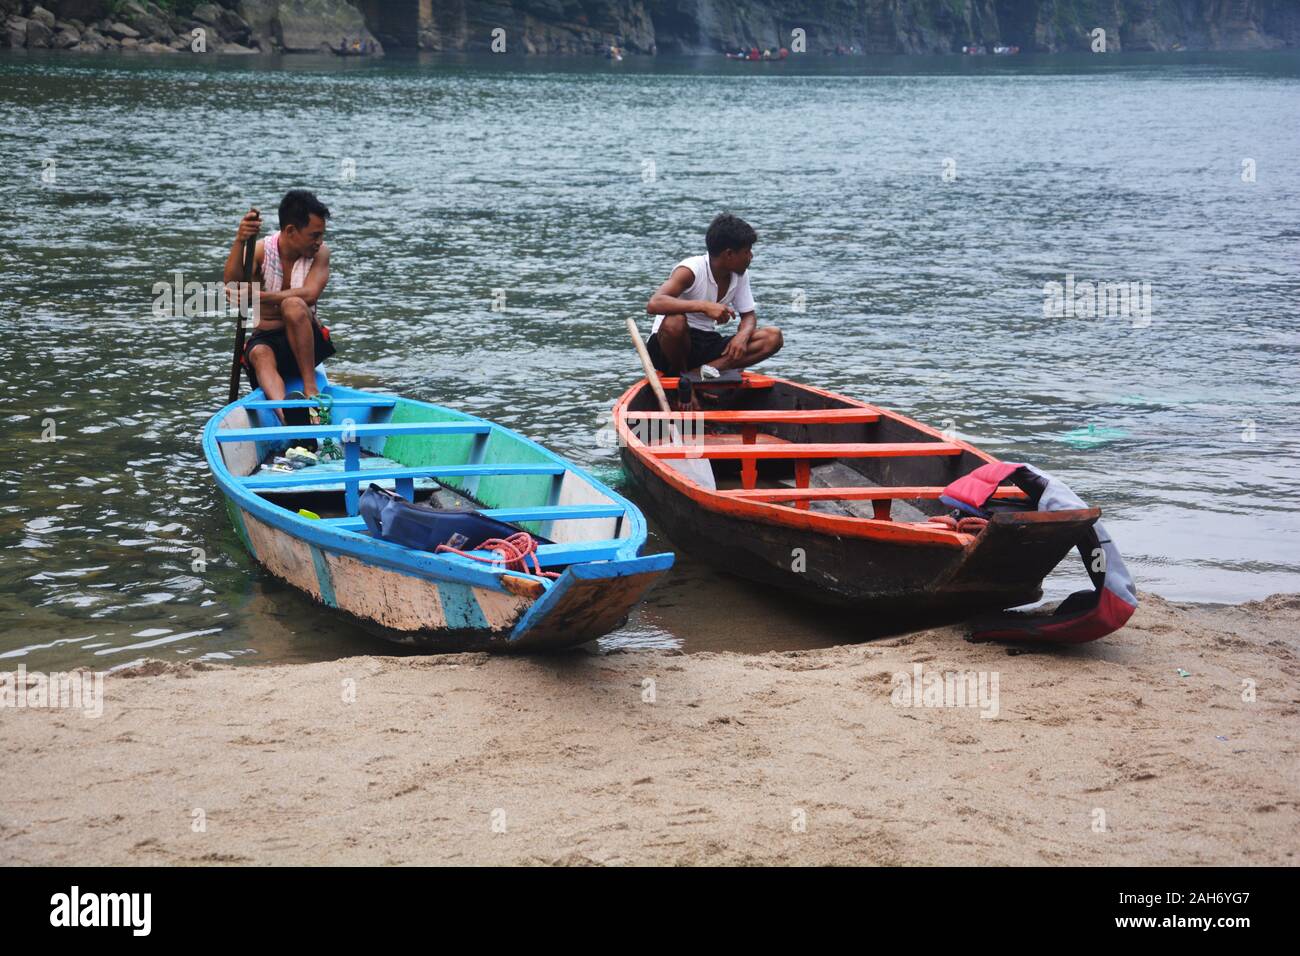 Close up of two wooden blue and red color boats and boatman sitting on it in river Umngot of Dawki, Shillong, Meghalaya, selective focusing Stock Photo